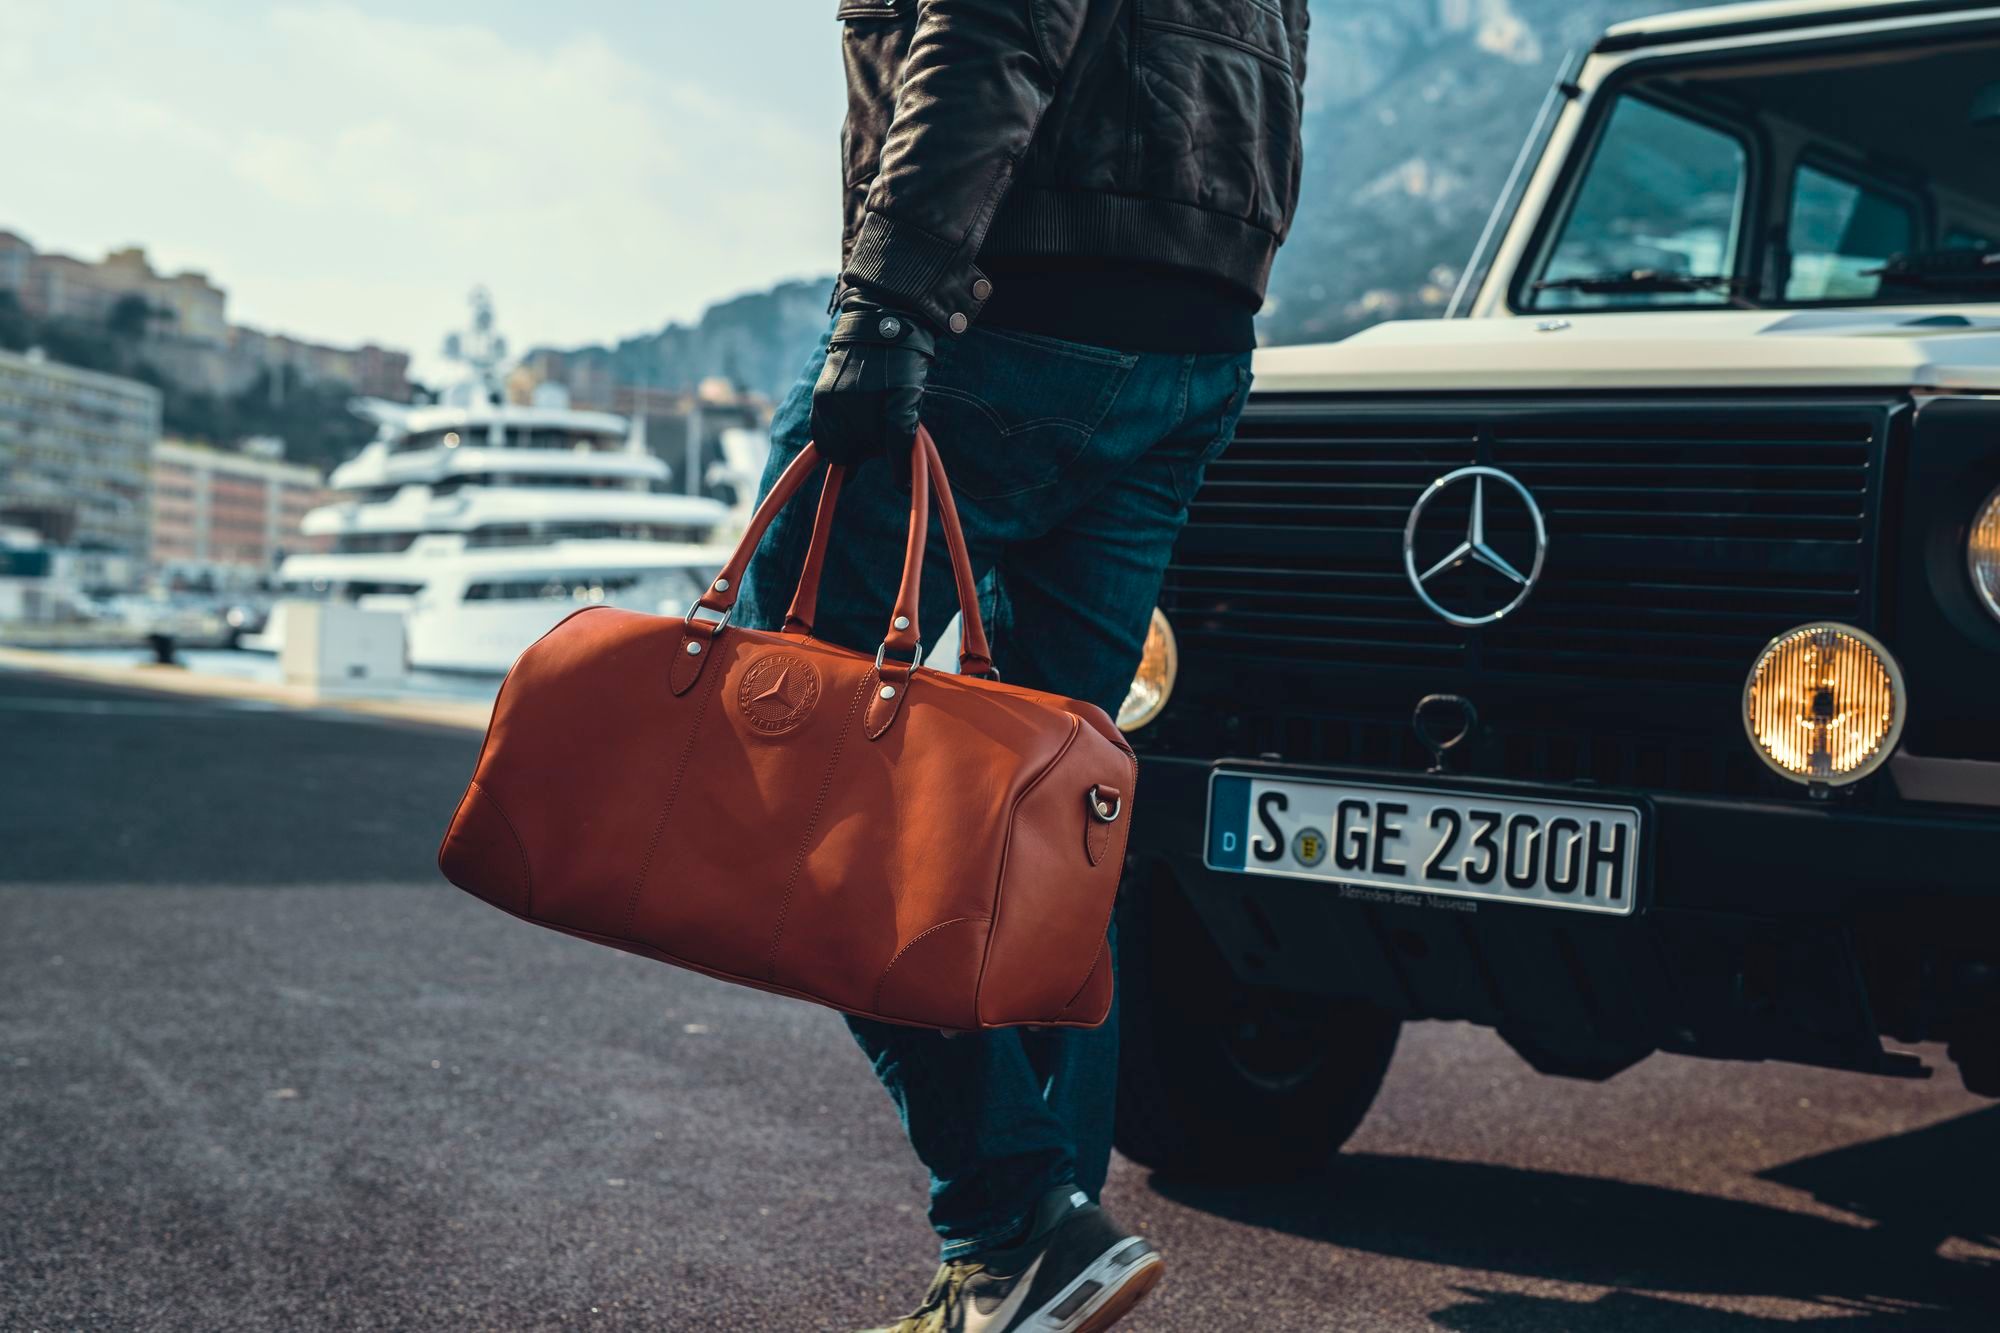 Mercedes-Benz Museum on X: To all you travellers out there! Time to style  up your journey - NOW. Check out the leather weekender and suitcase in our  shop, and choose a cool